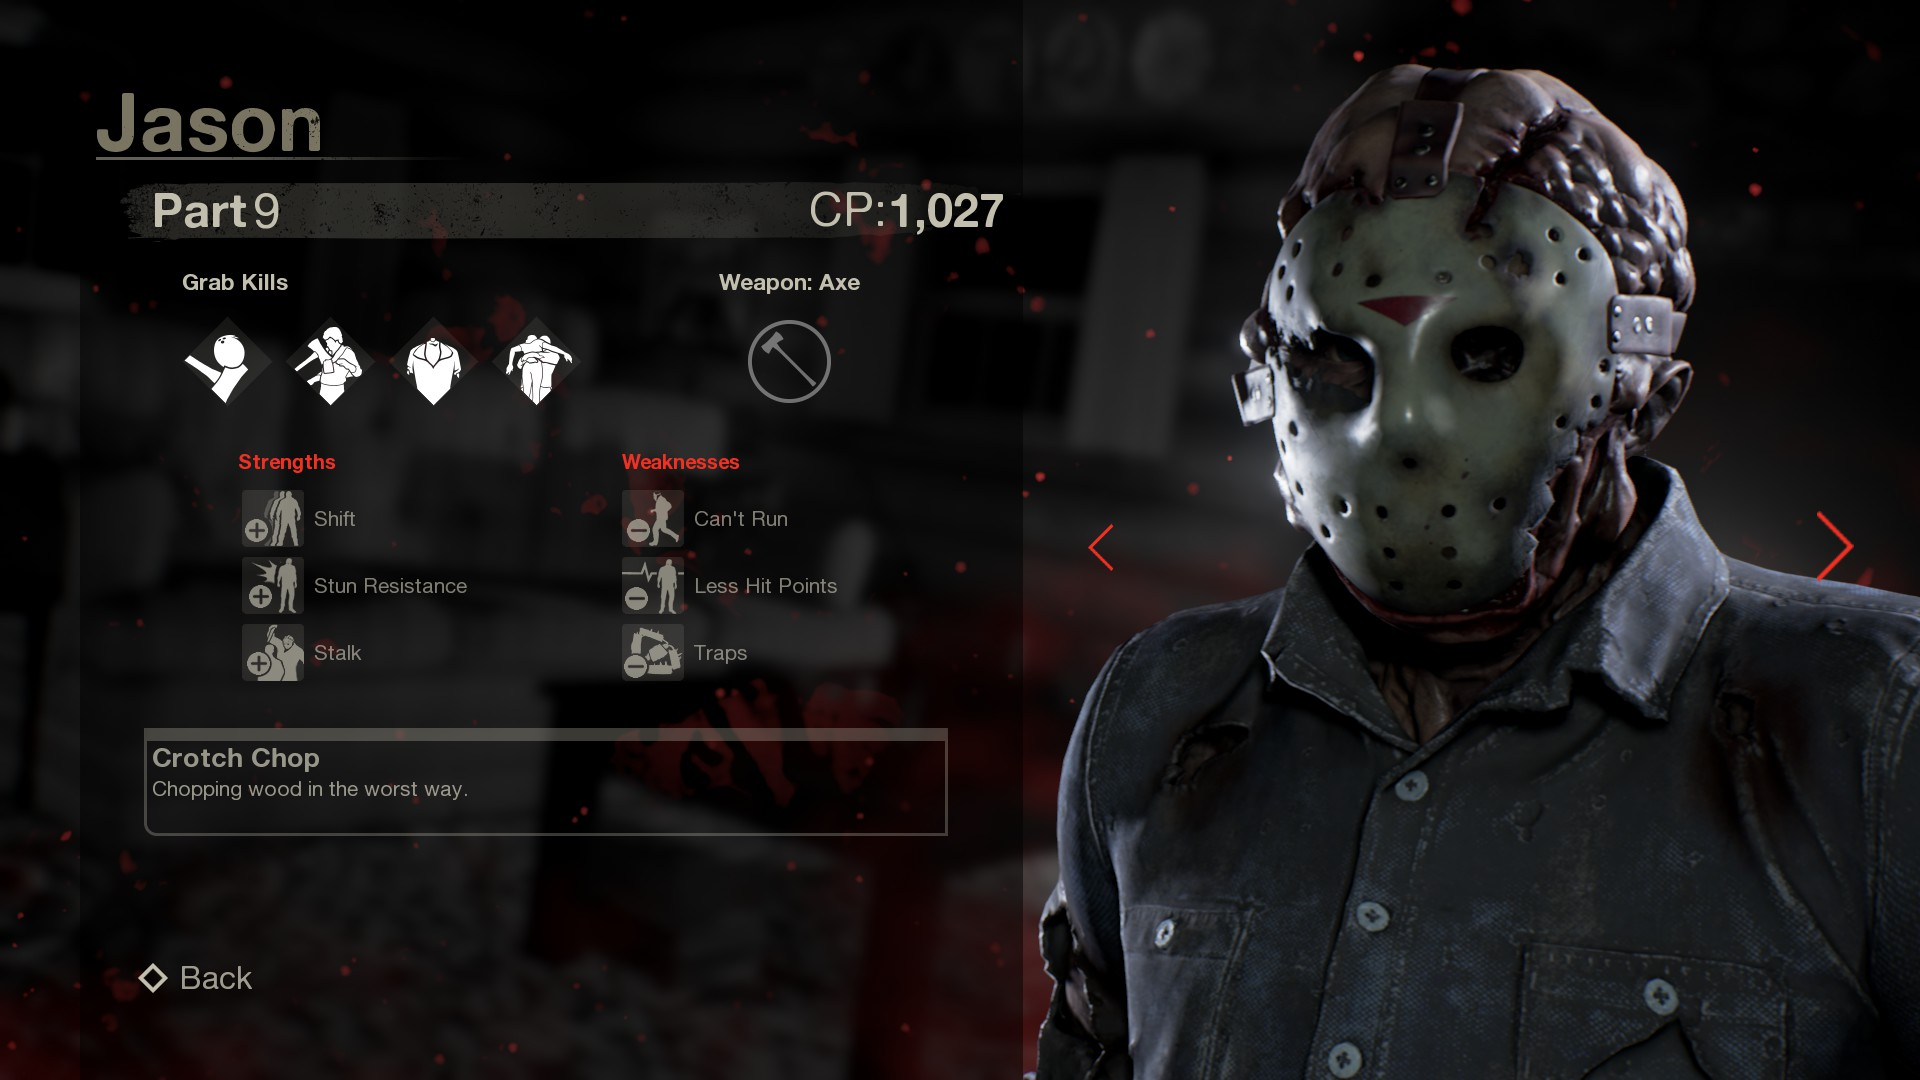 Friday the 13th: The Game': How To Call The Police